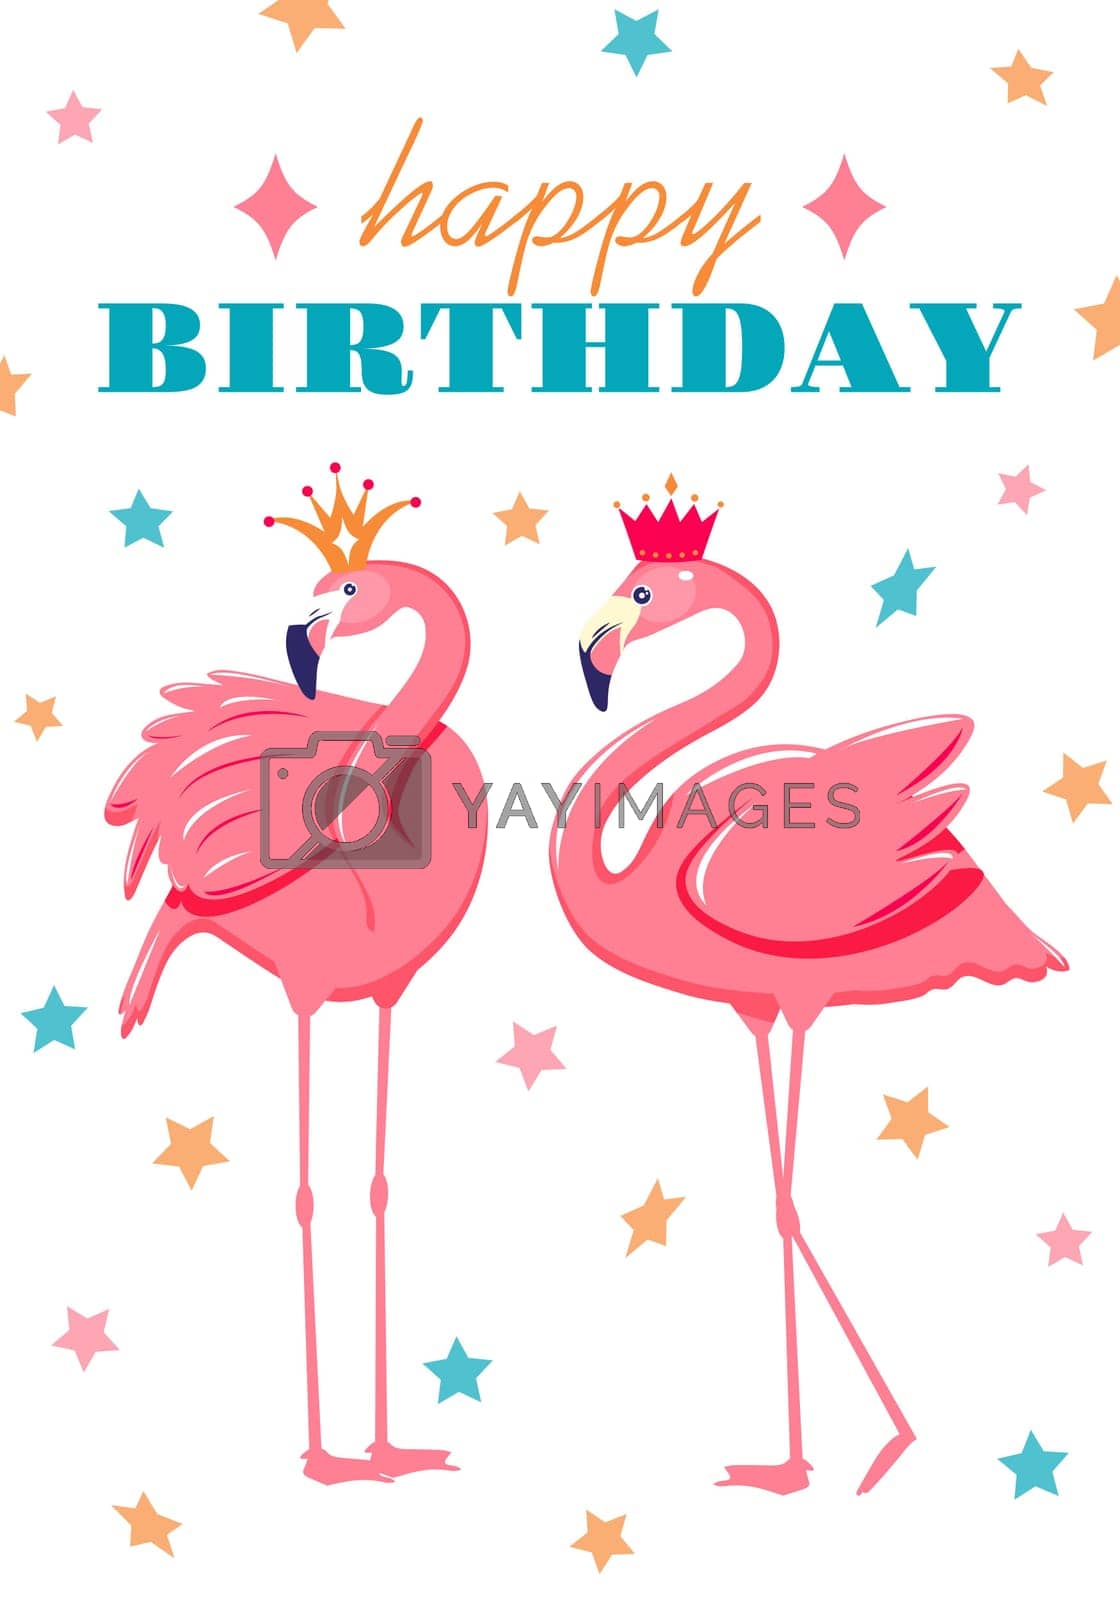 Royalty free image of Birthday Party card with pink flamingo and stars confetti. by idressart